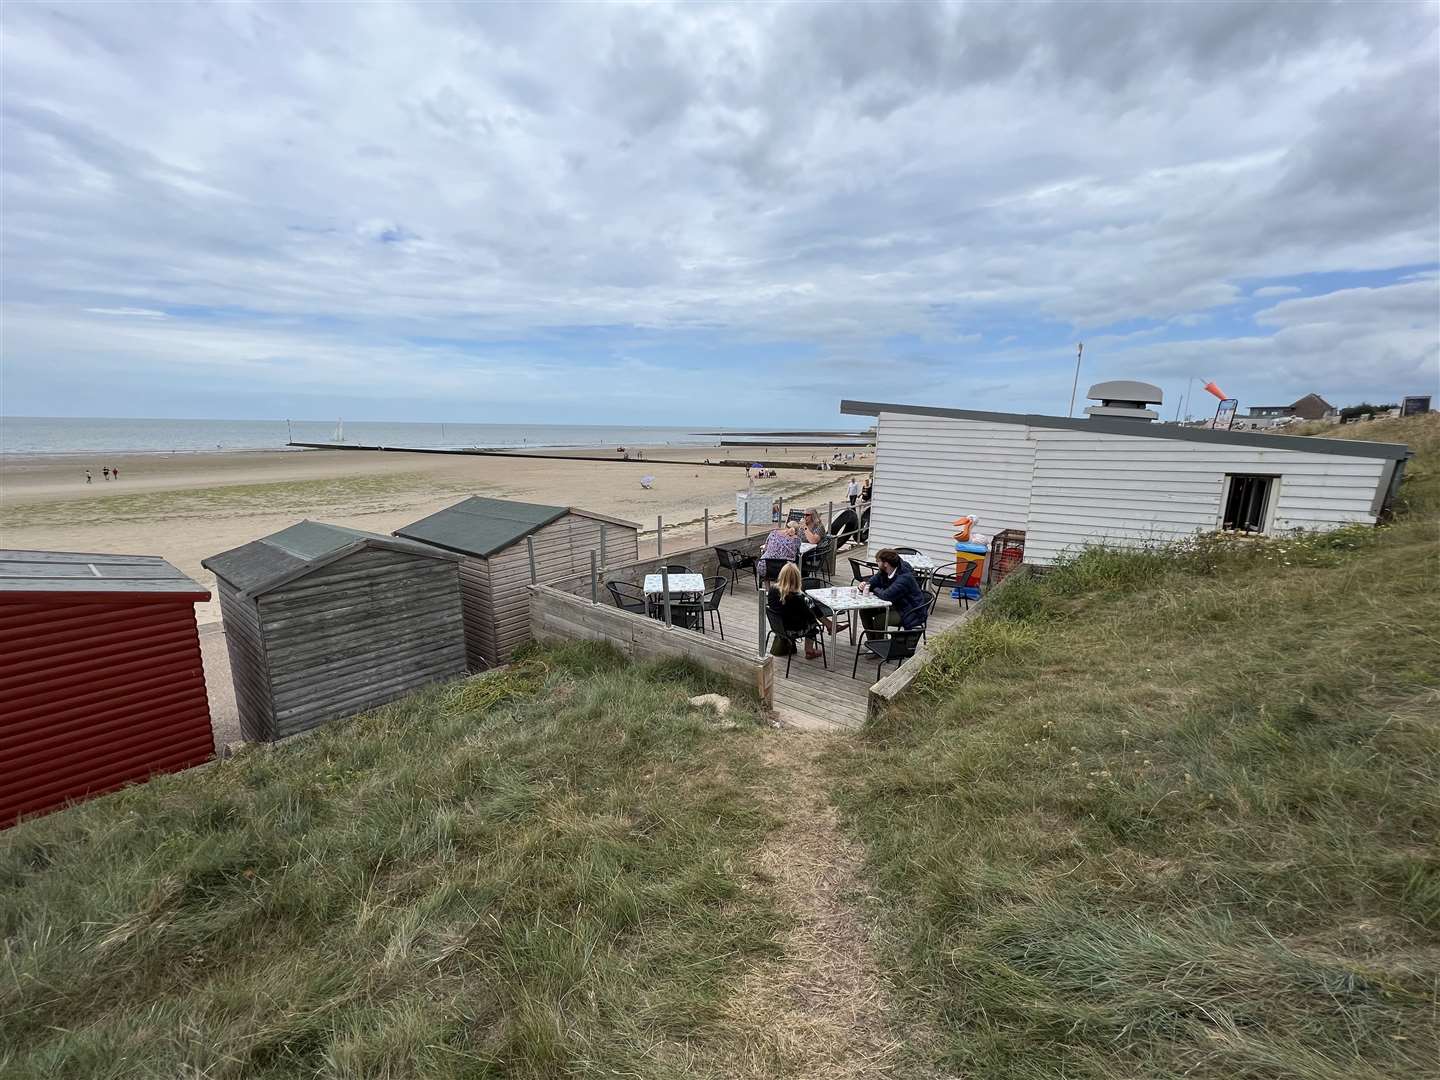 The Windshack in Minnis Bay is nestled behind the huts but with a clear view across the beach